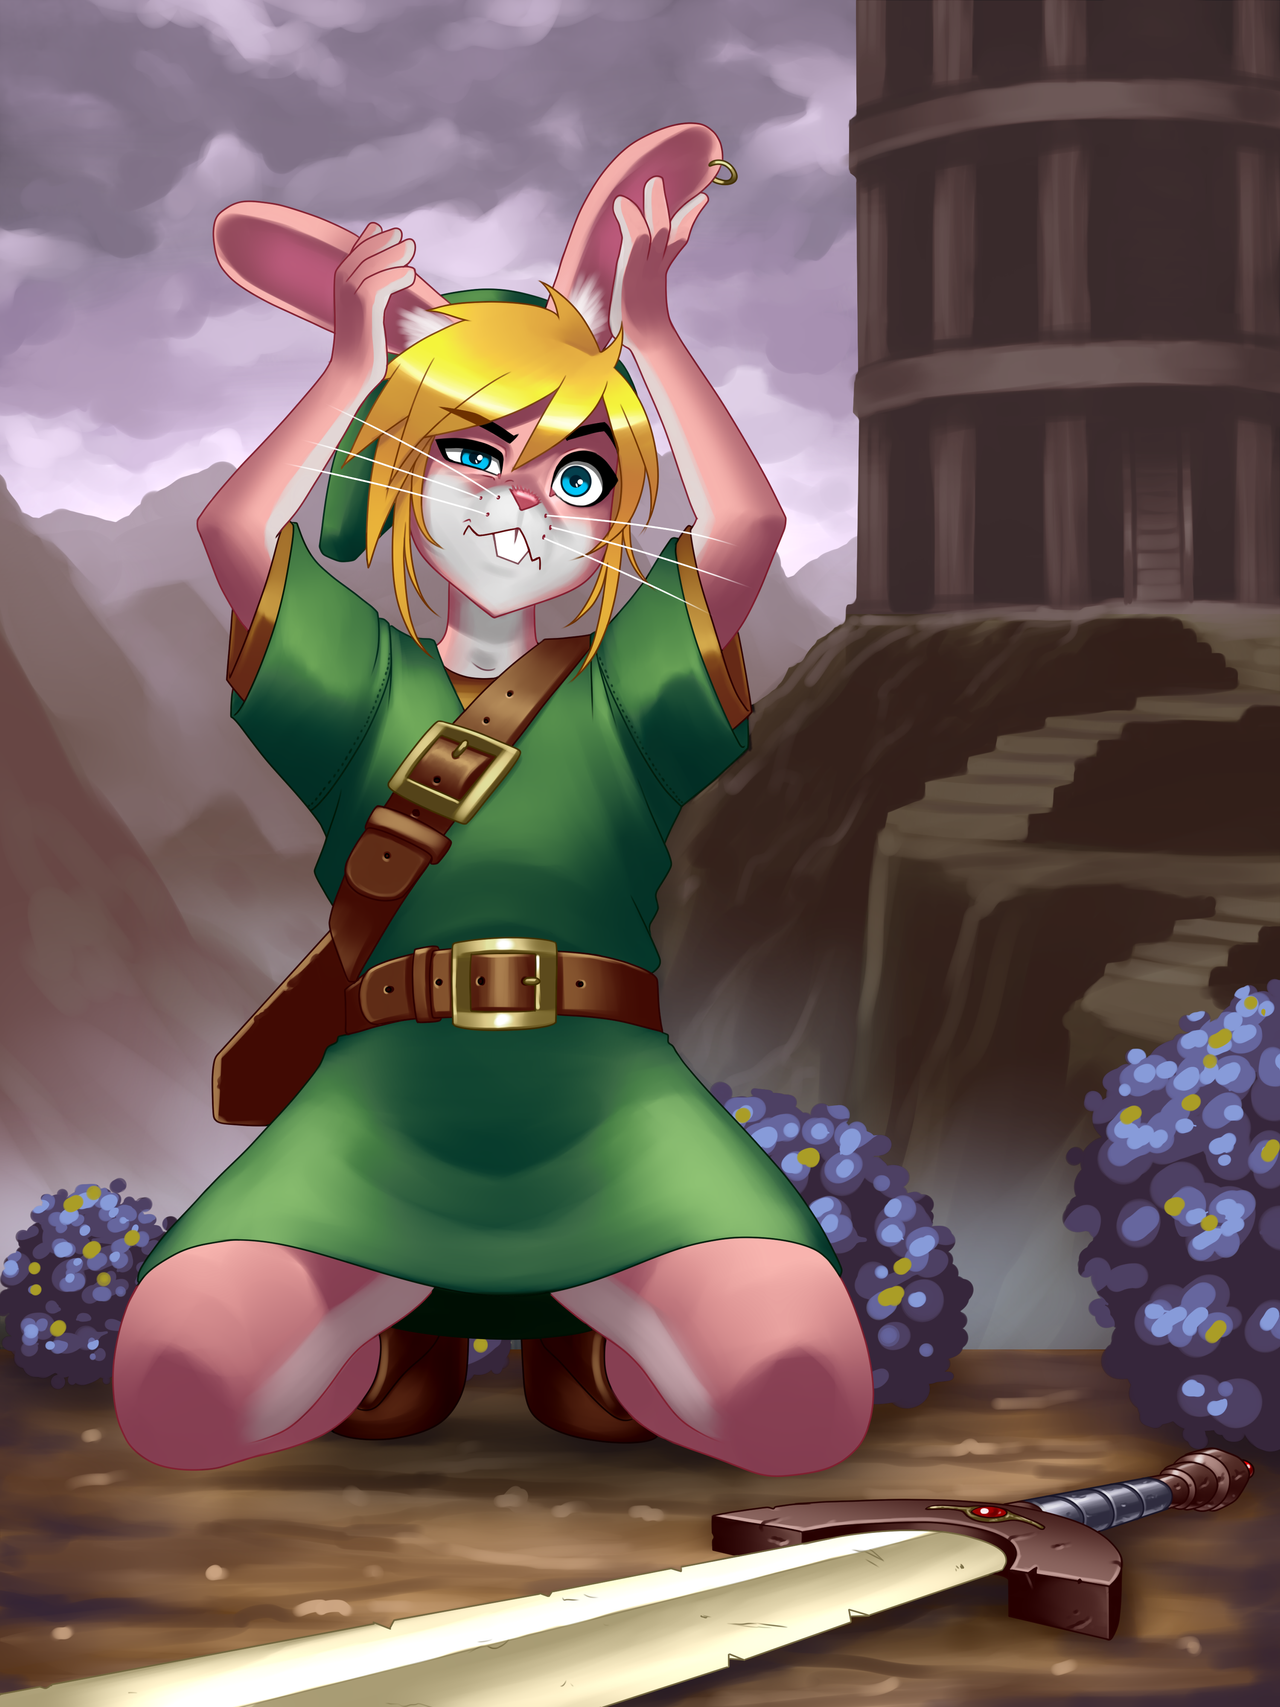 a_link_to_the_past___bunny_link_by_ronindude-d8l04du.png